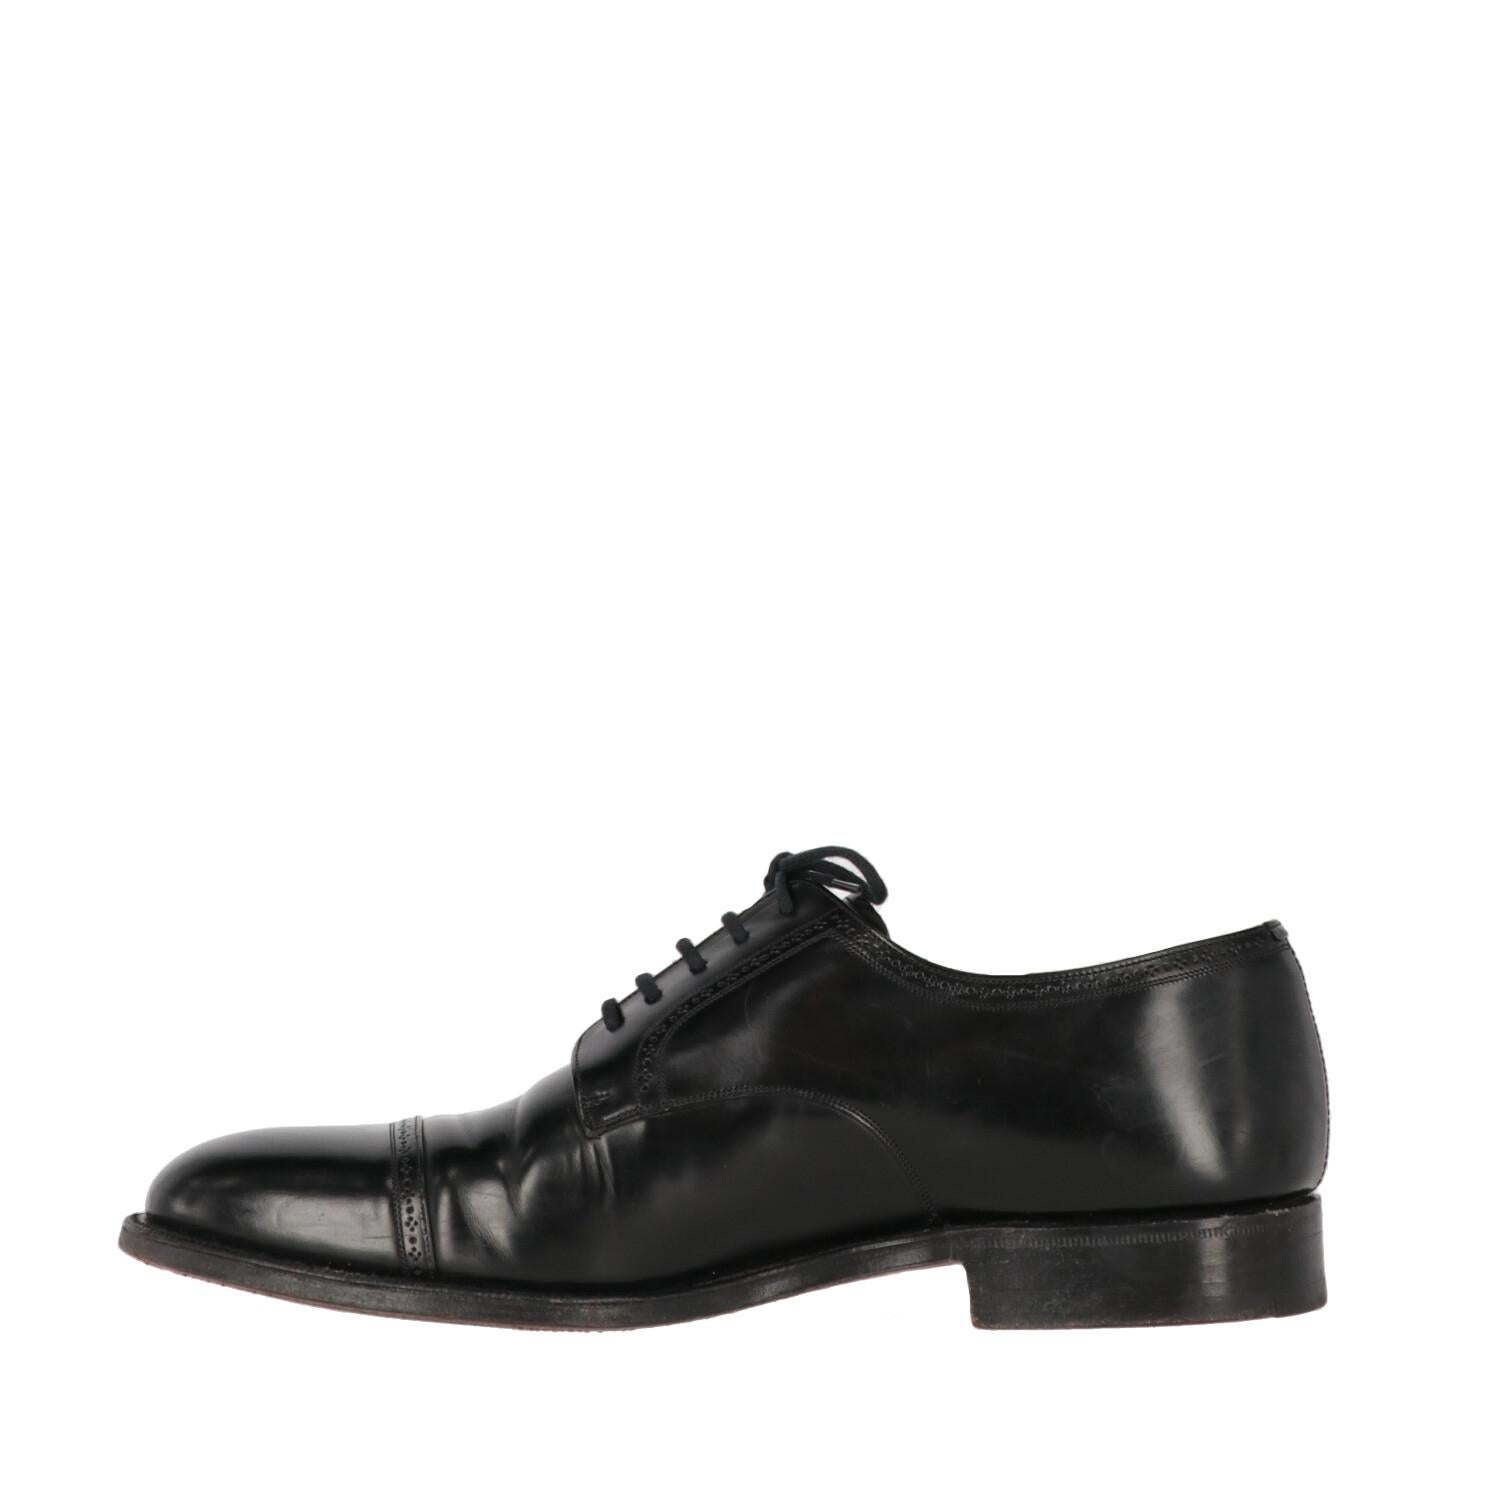 Church's genuine black leather classic lace-up shoes with tone-on-tone laces, brogue decorations and round toe. Regular fit.

Size: 10 UK

Heel: 2,8 cm
Insole lenght: 30 cm

Product code: X0188

Notes: The item shows scratches and some wrinkles on